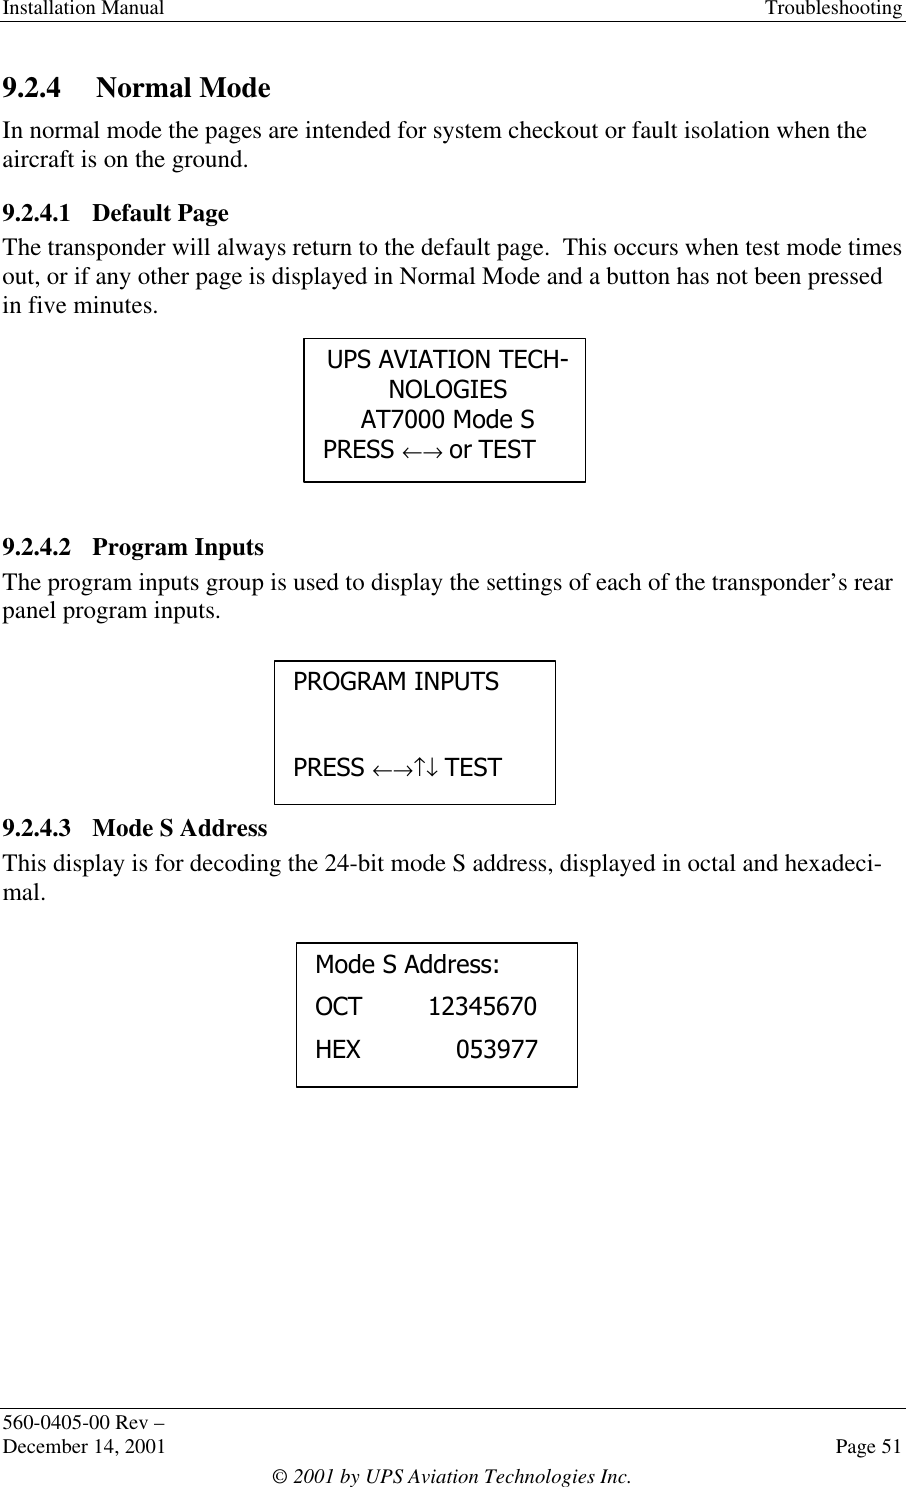 Installation Manual Troubleshooting560-0405-00 Rev –December 14, 2001 Page 51© 2001 by UPS Aviation Technologies Inc.9.2.4 Normal ModeIn normal mode the pages are intended for system checkout or fault isolation when theaircraft is on the ground.9.2.4.1 Default PageThe transponder will always return to the default page.  This occurs when test mode timesout, or if any other page is displayed in Normal Mode and a button has not been pressedin five minutes.9.2.4.2 Program InputsThe program inputs group is used to display the settings of each of the transponder’s rearpanel program inputs.9.2.4.3 Mode S AddressThis display is for decoding the 24-bit mode S address, displayed in octal and hexadeci-mal.PROGRAM INPUTSPRESS ←→↑↓ TESTUPS AVIATION TECH-NOLOGIESAT7000 Mode SPRESS ←→ or TESTMode S Address:OCT  12345670HEX 053977